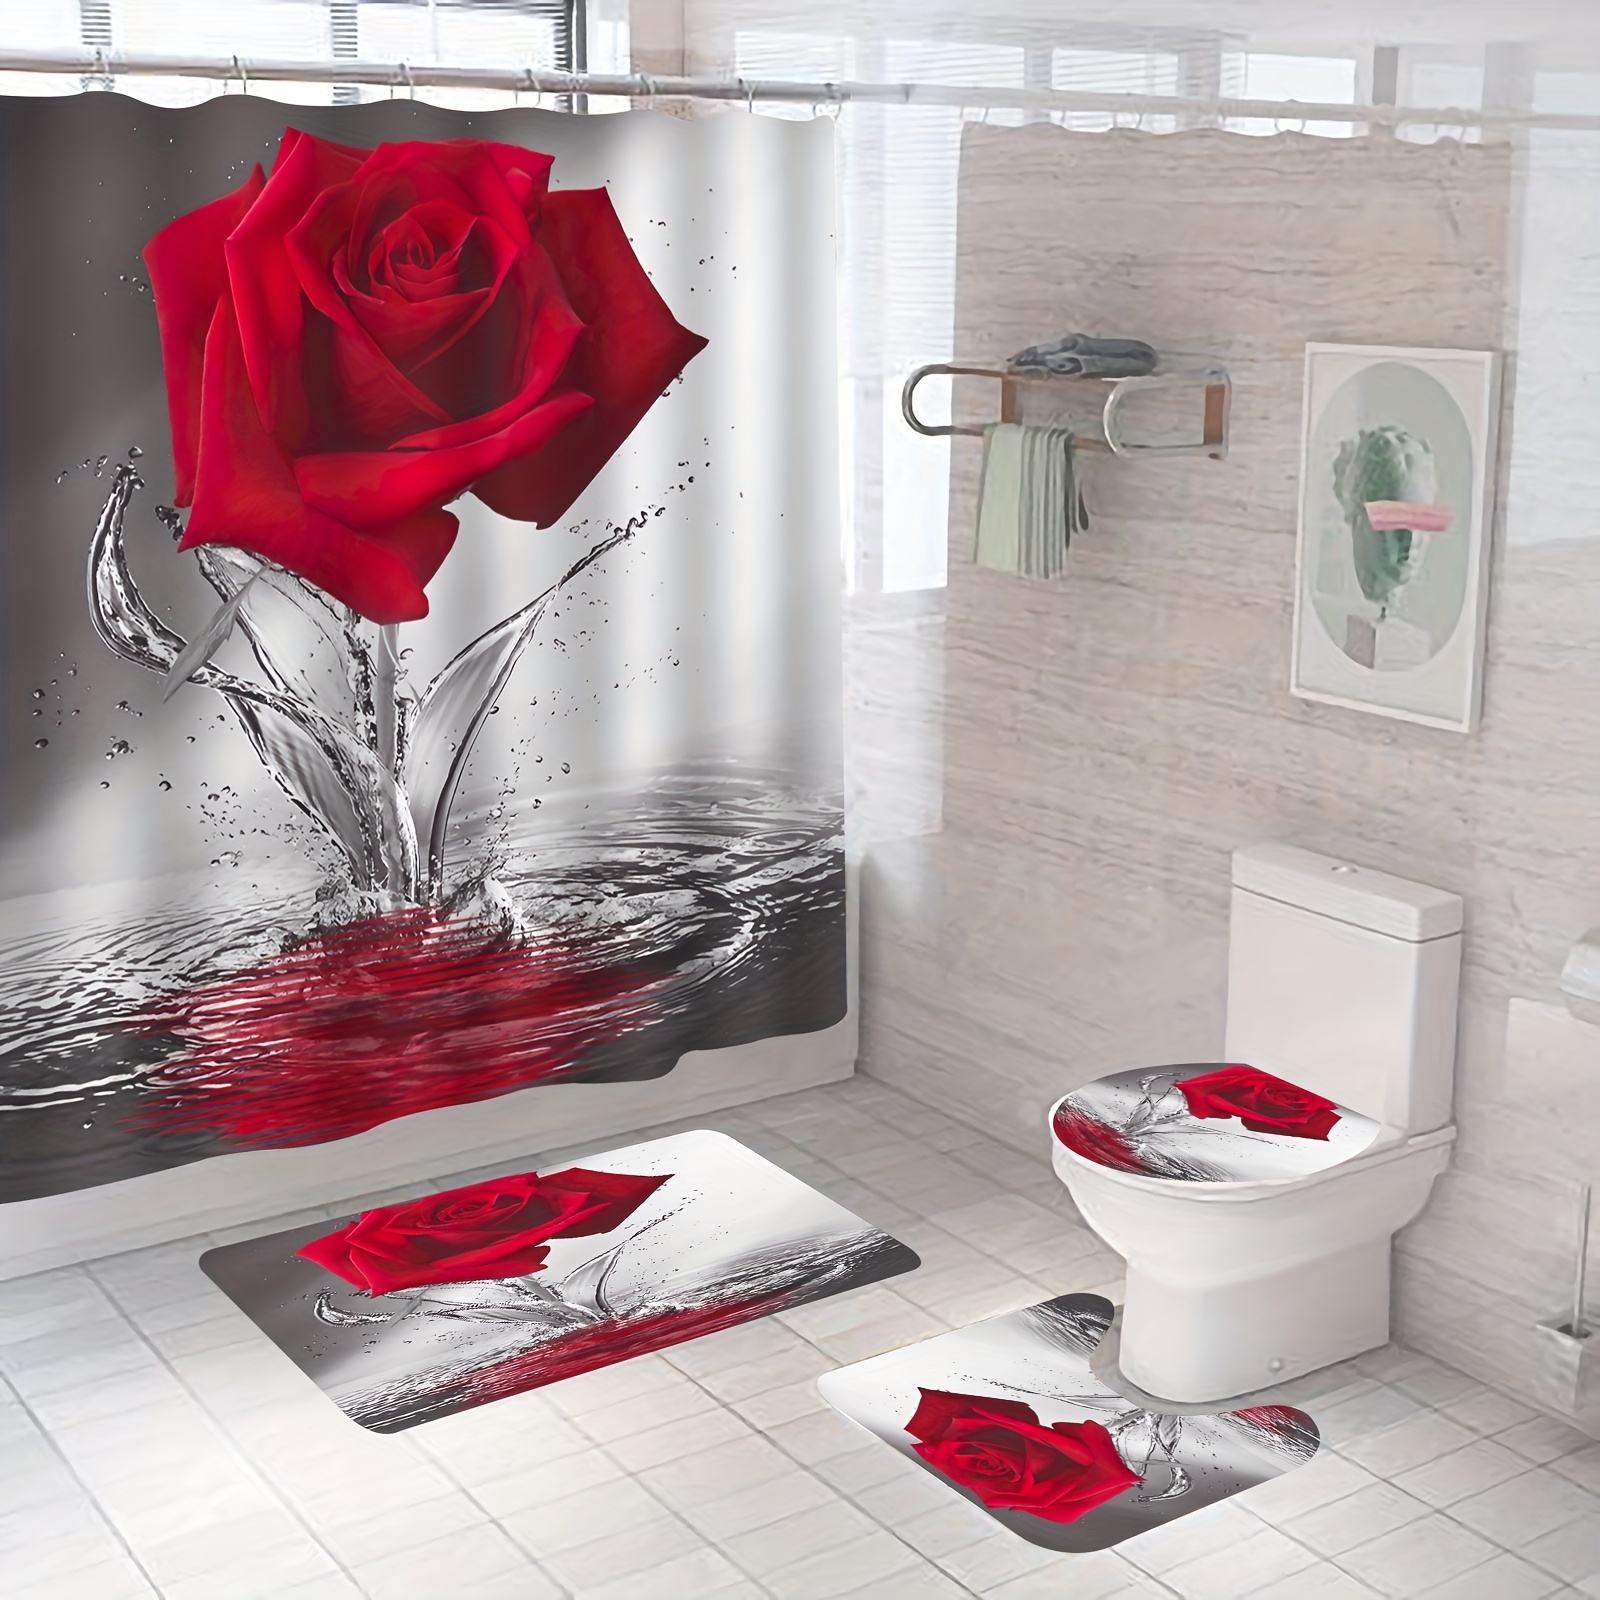 1pc/3pcs/4pcs Romantic Floral Red Rose Bathroom Shower Curtain Set With  Non-Slip Mat And 12 Hooks - Soft And Waterproof Fabric For A Luxurious  Bathroo